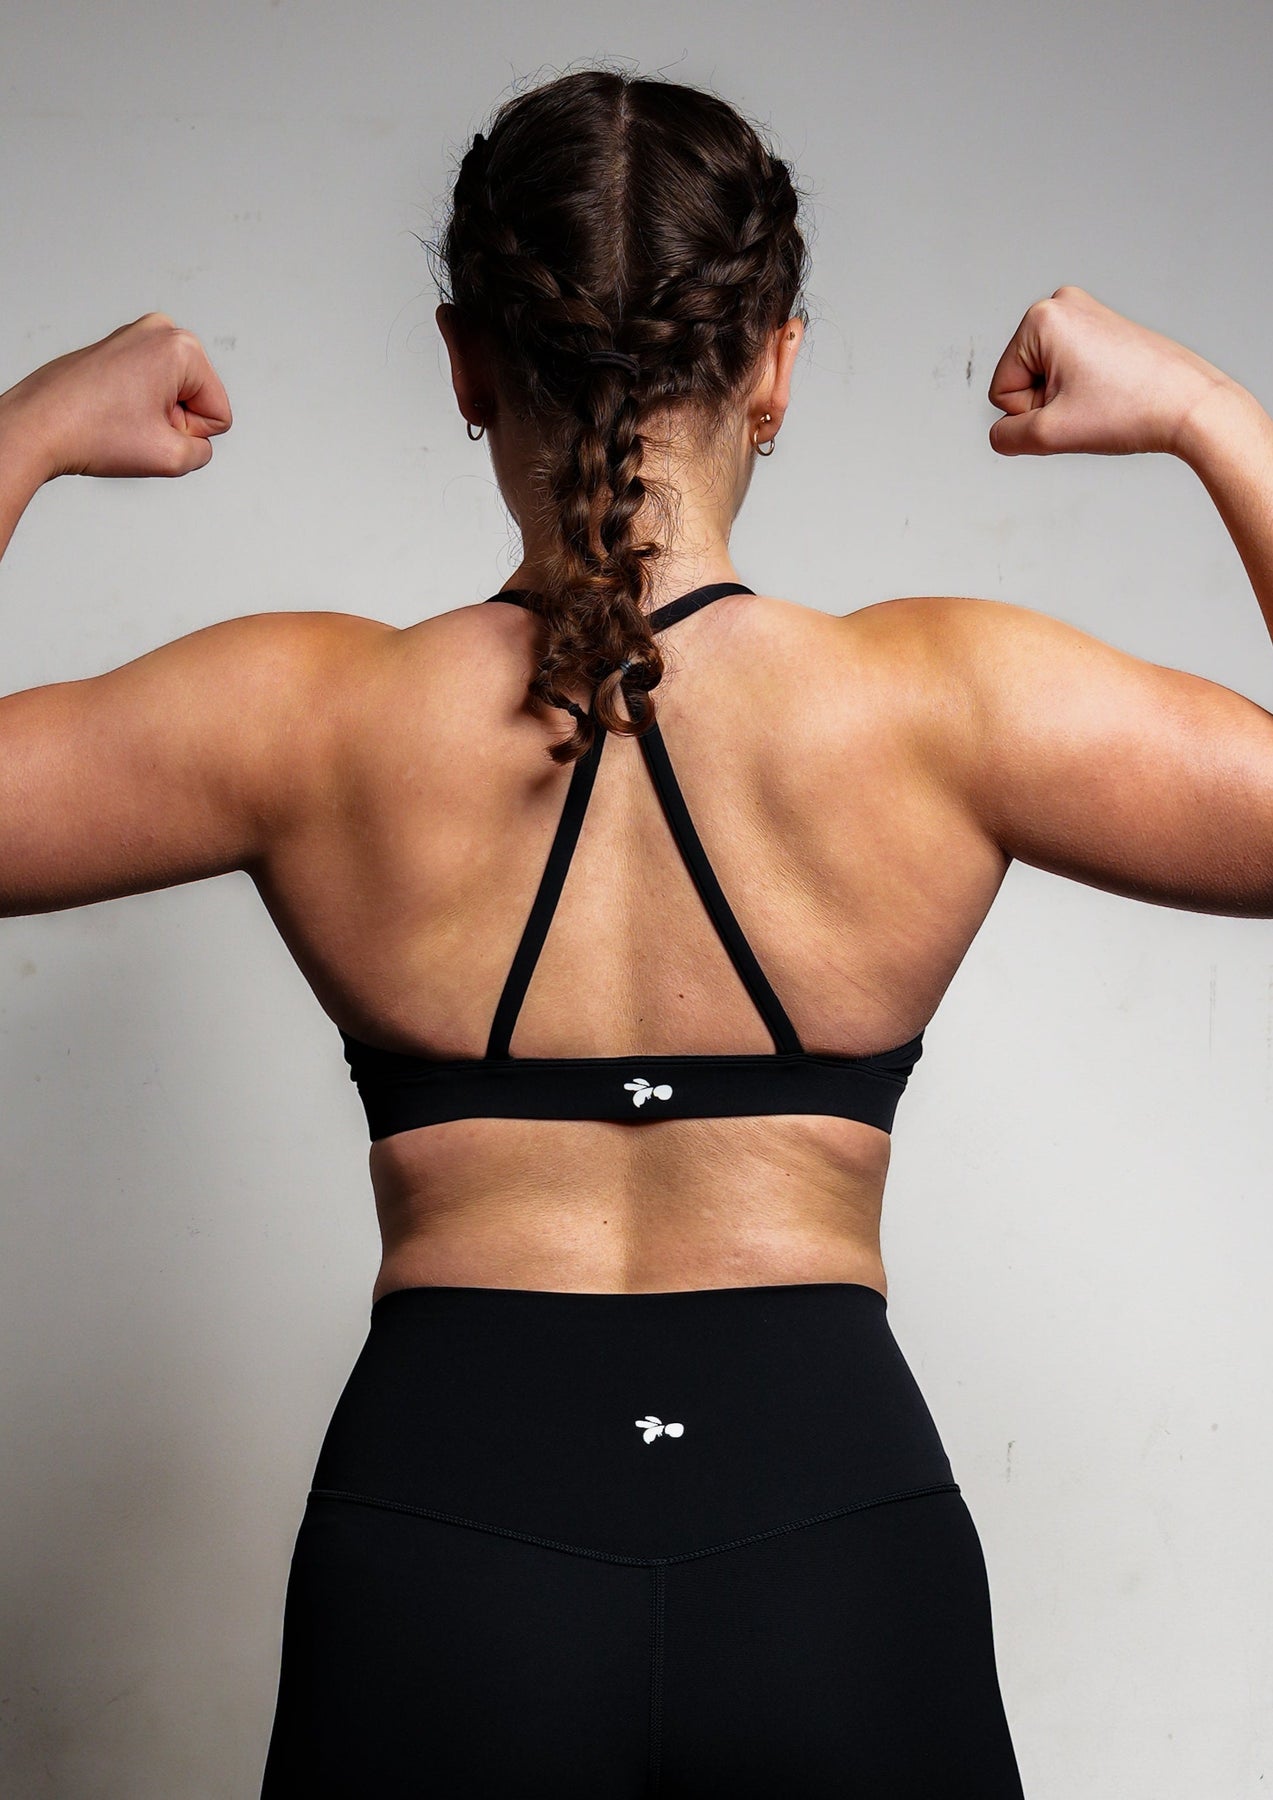 How Much Does A Sports Bra Weigh In Ounces? – solowomen